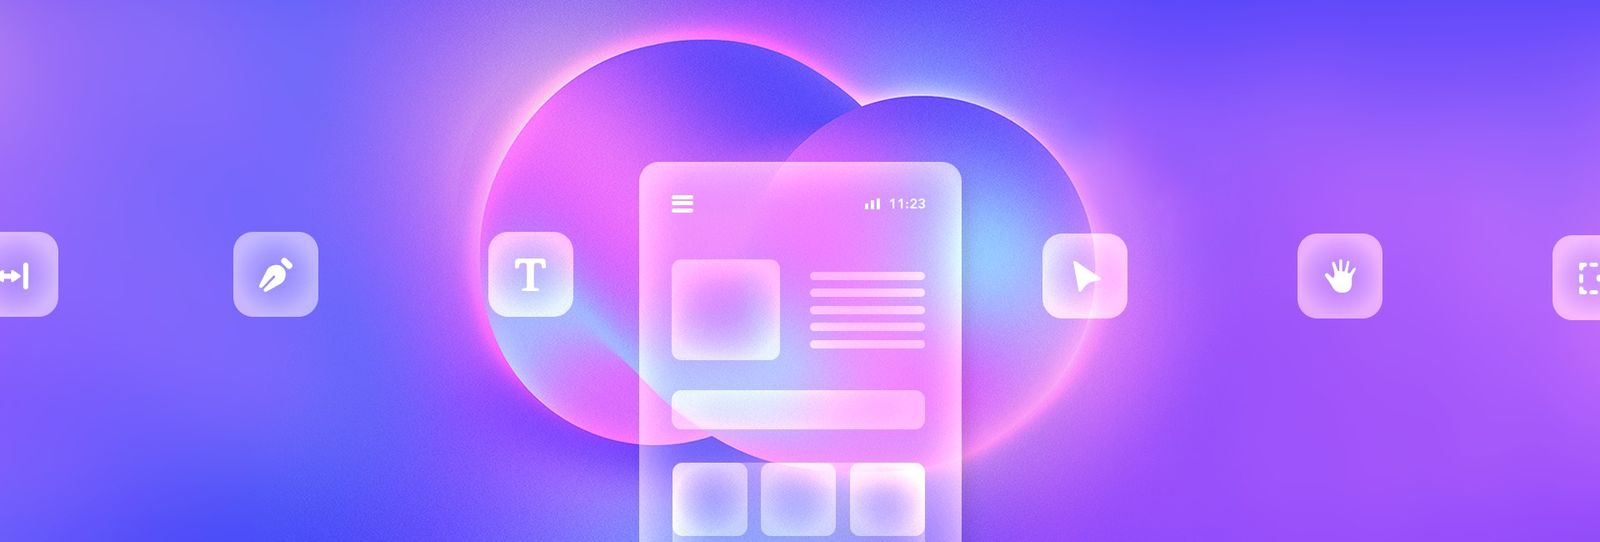 UI/UX Design Trends and practices to look for 2023